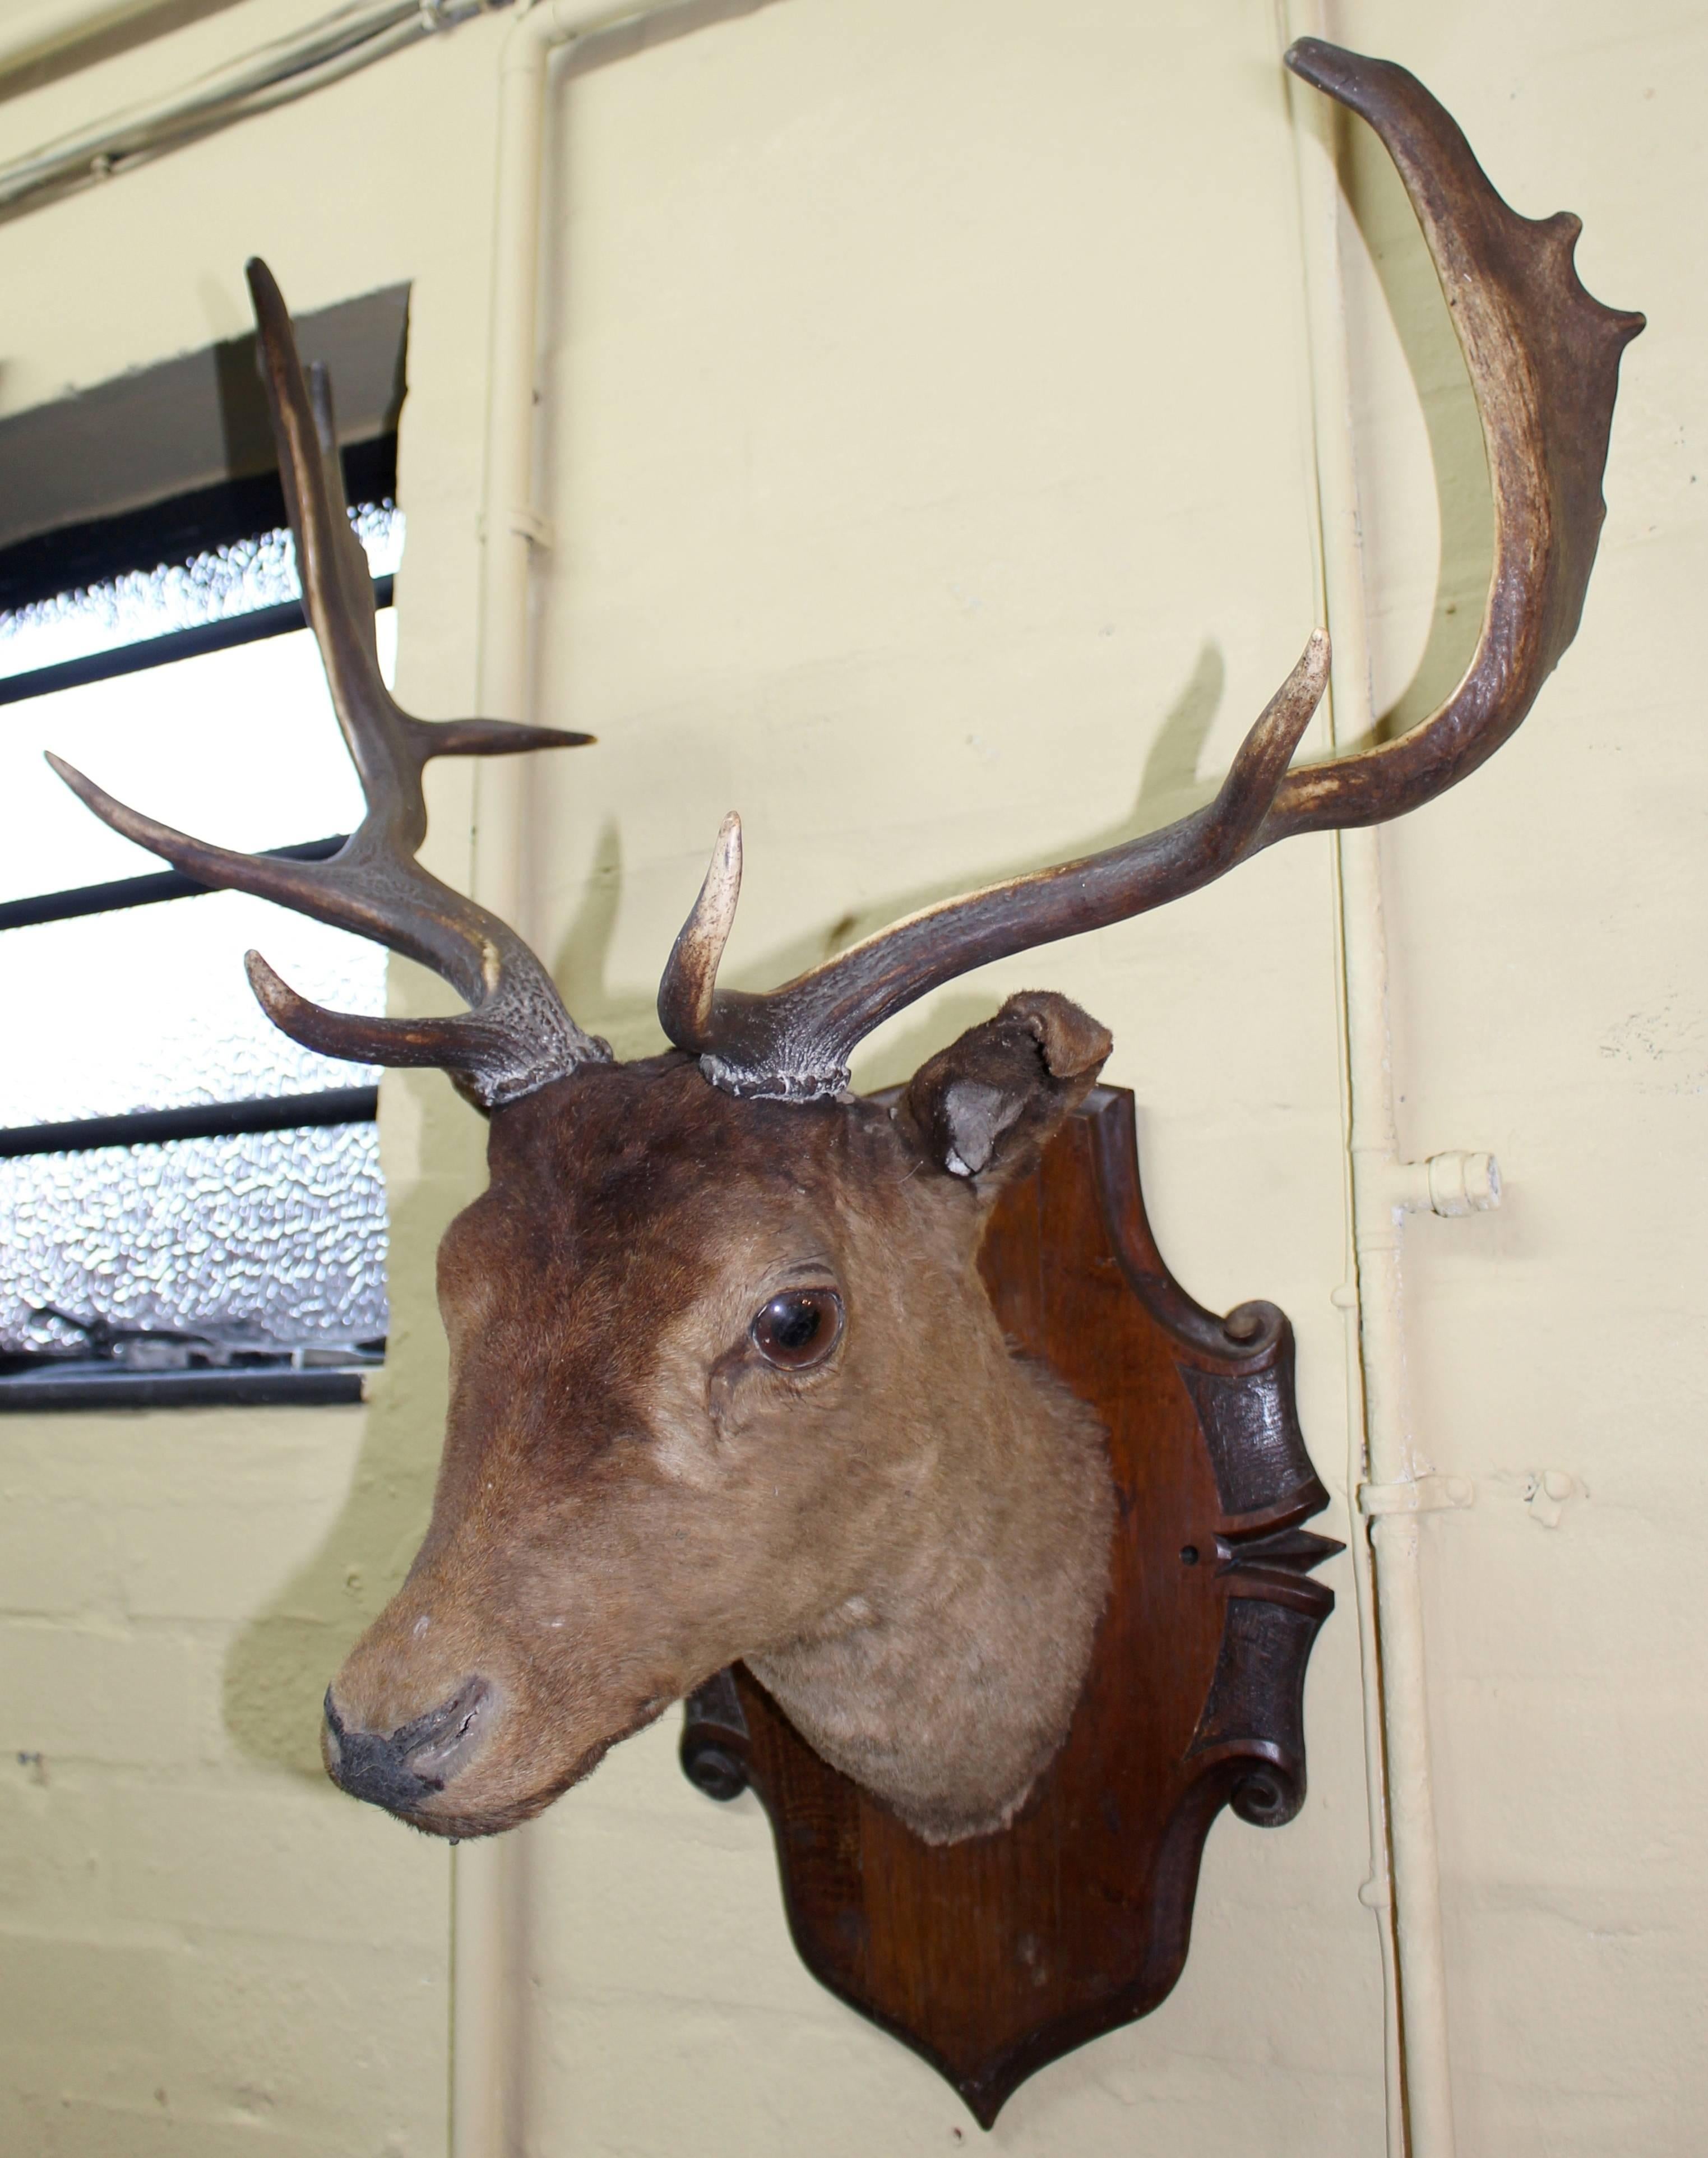 Period Victorian
Width 56 cm / 22 in
Protrusion 40 cm / 15 3/4 in
Height 76 cm / 30 in
Condition: Very good condition. Some signs of wear commensurate with age




Fine antique deer head mounted on shield





Free UK mainland